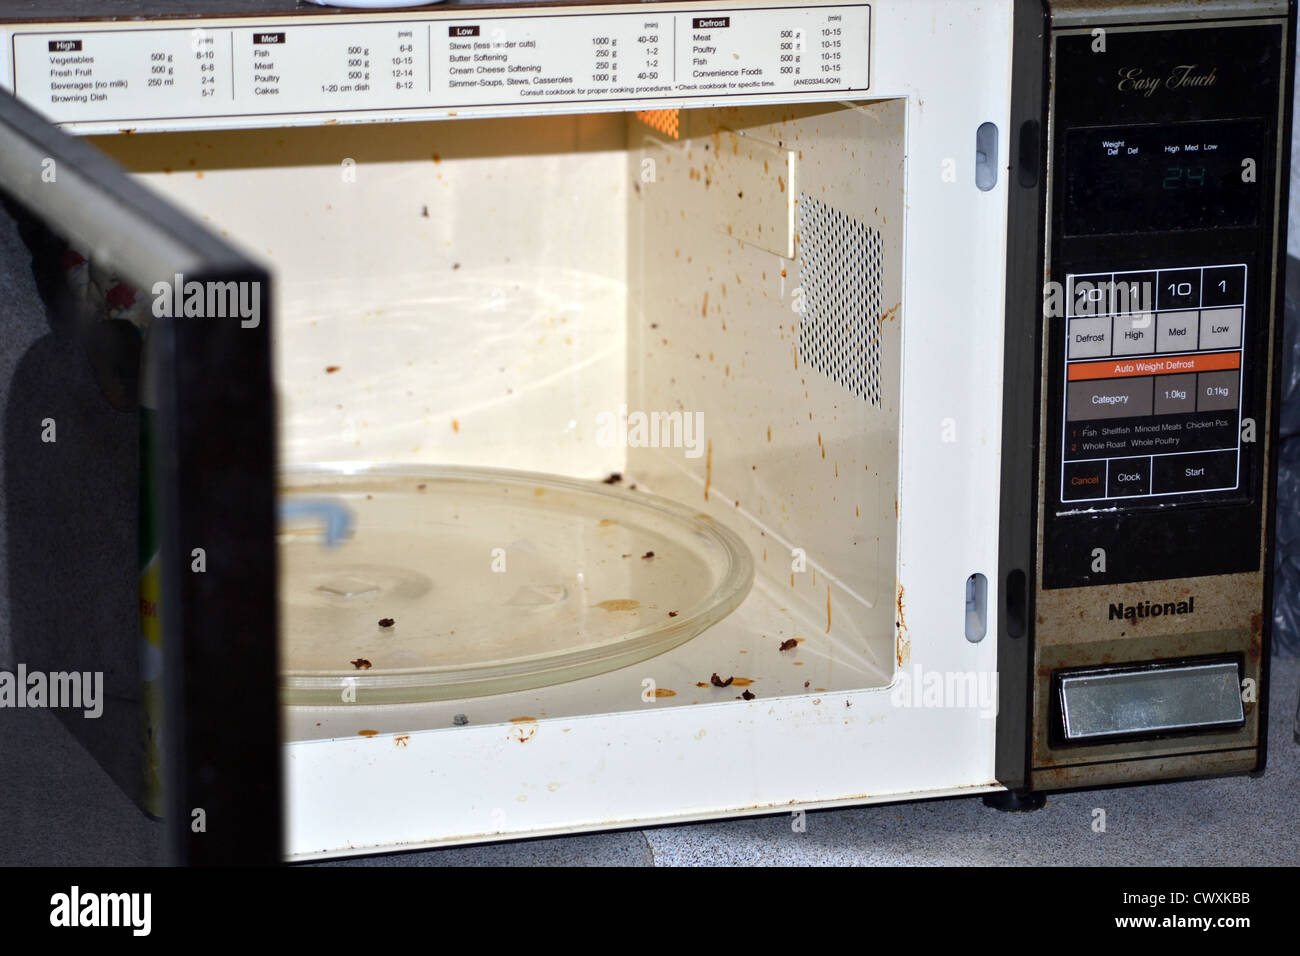 Dirty old microwave Stock Photo